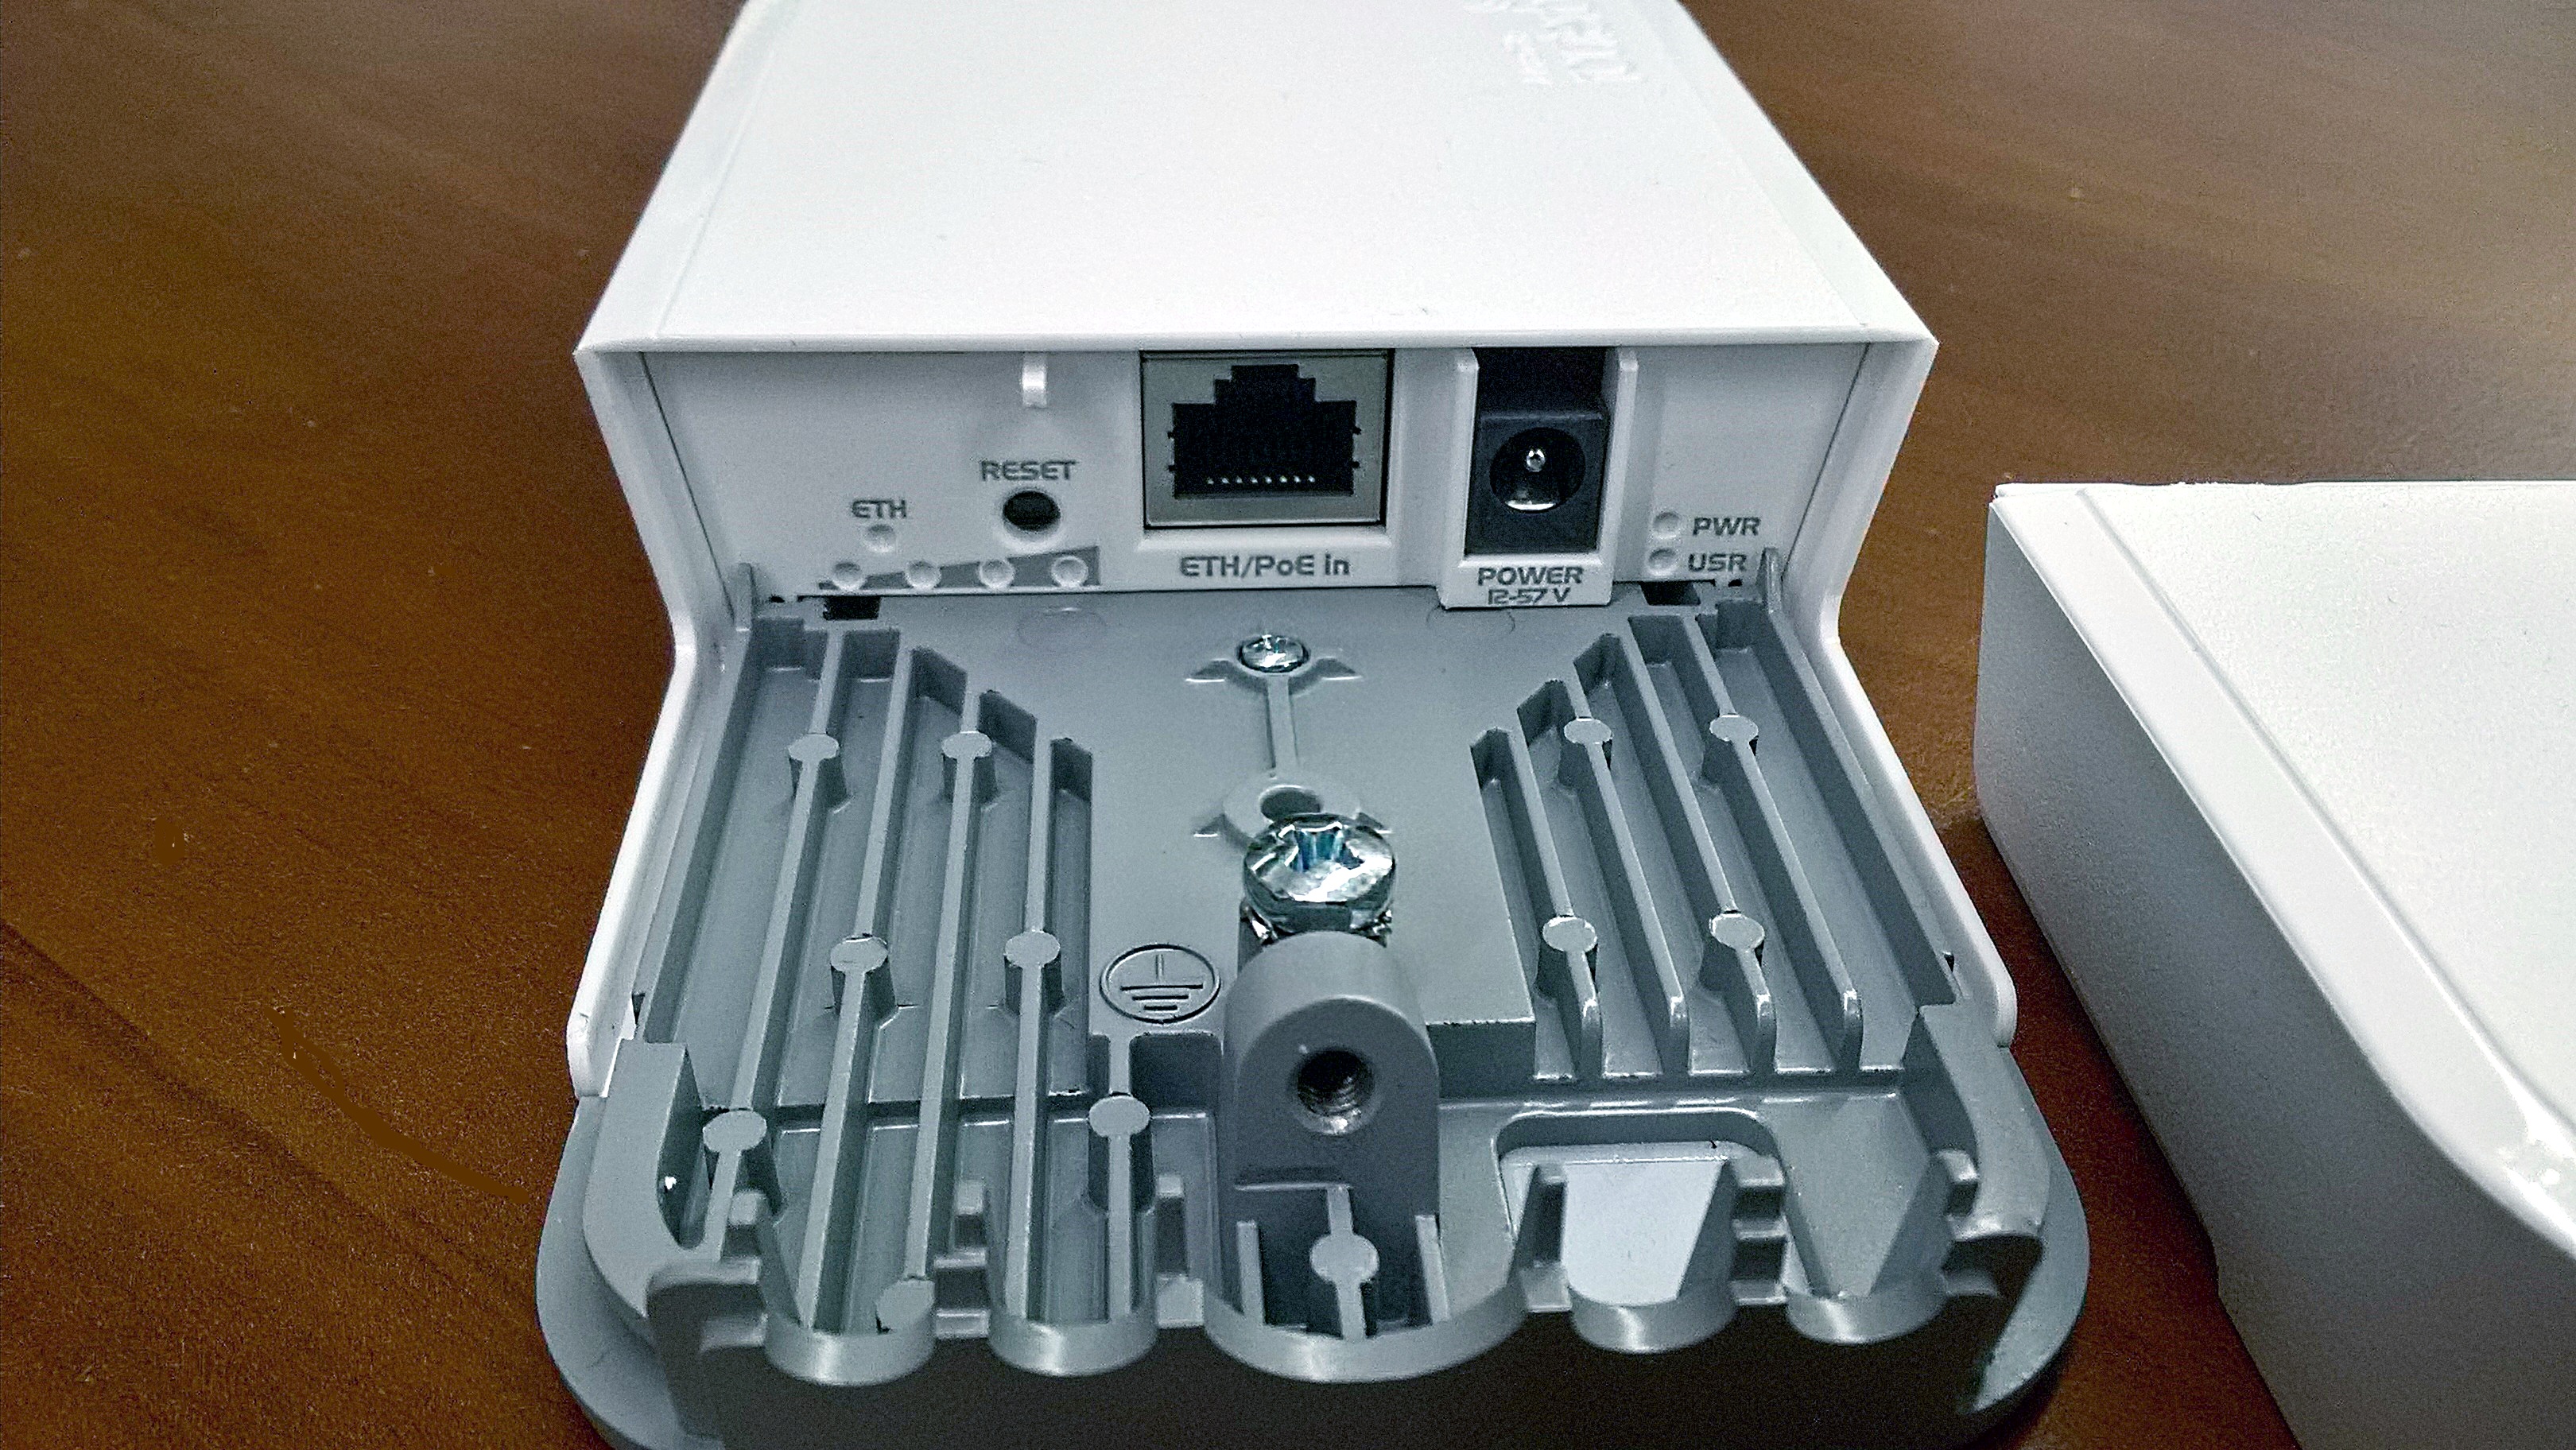 1GE PPC-1000-V 60 GHz low cost link (open box)